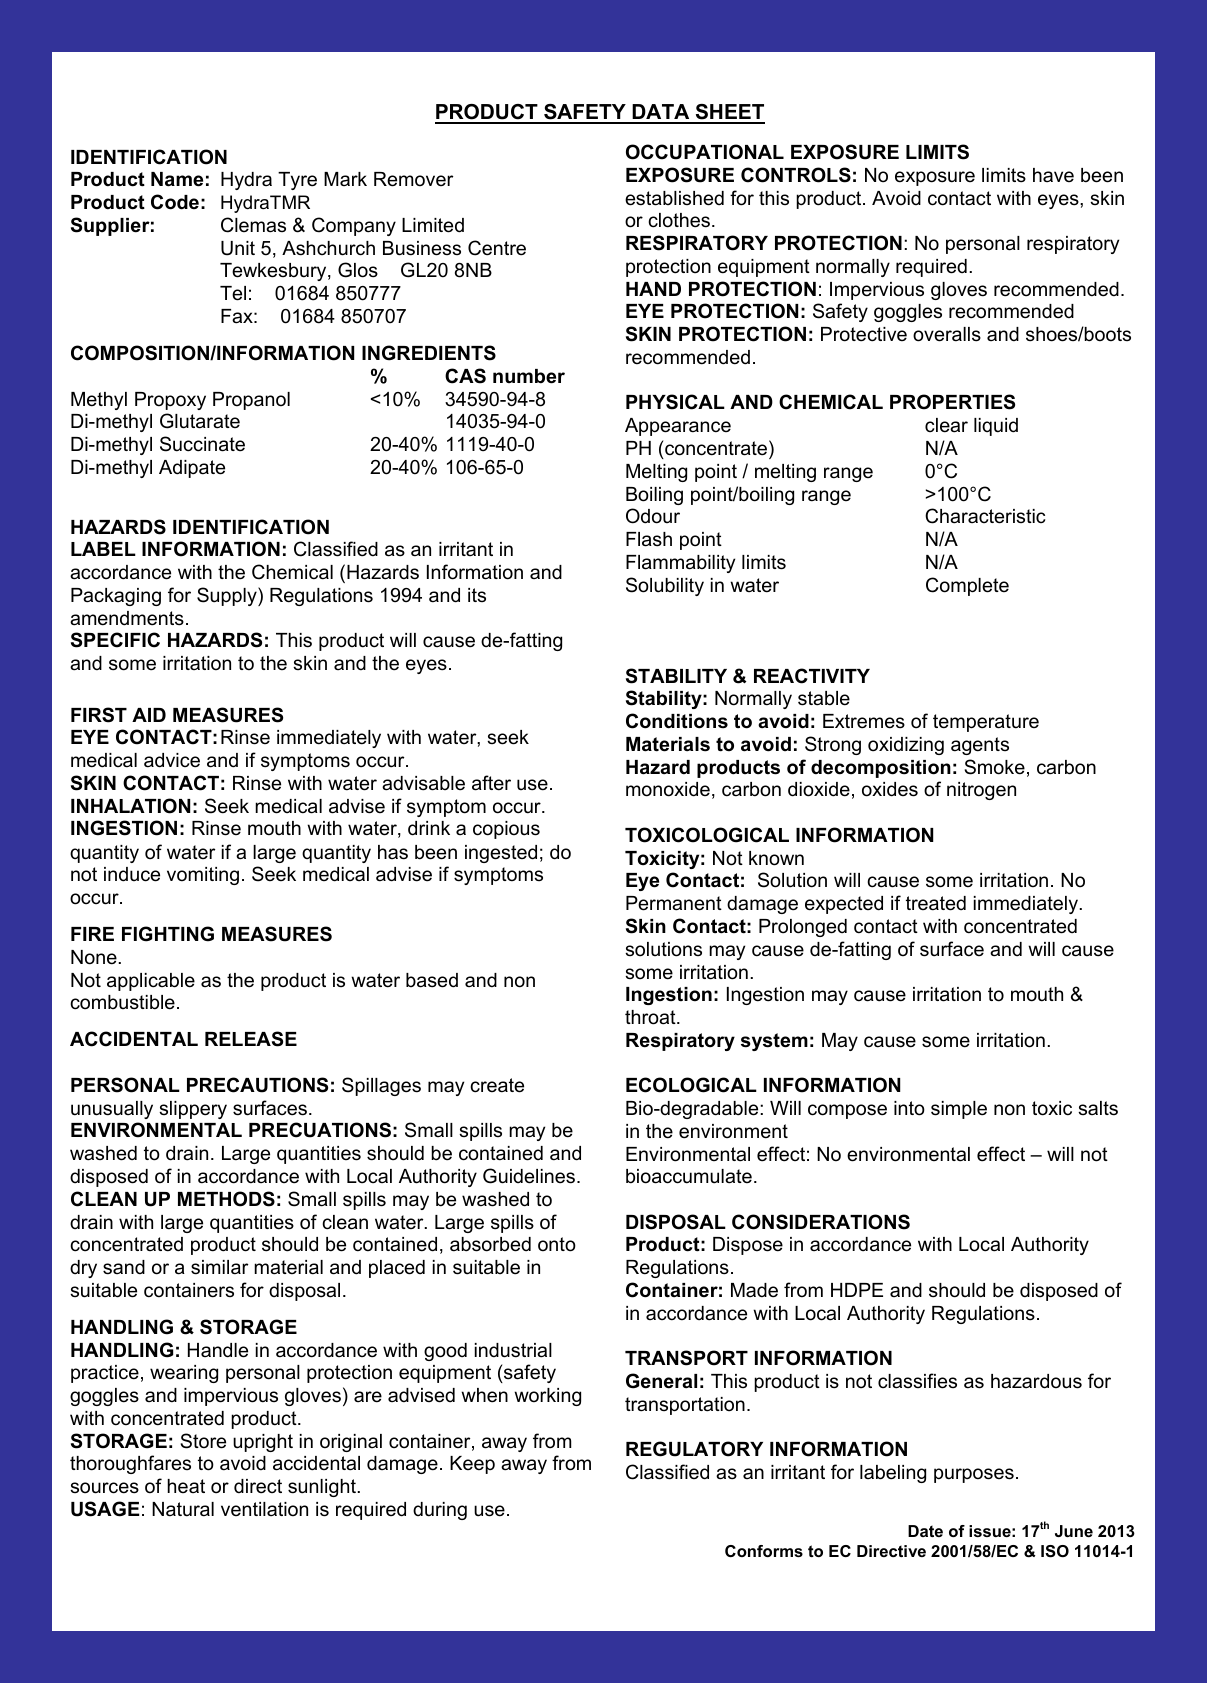 Page 2 of 2 - Clemas - Hydra Tyre Mark Remover Chemical Data Sheet Hydra-Tyre-Mark-Remover-Chemical-Data-Sheet